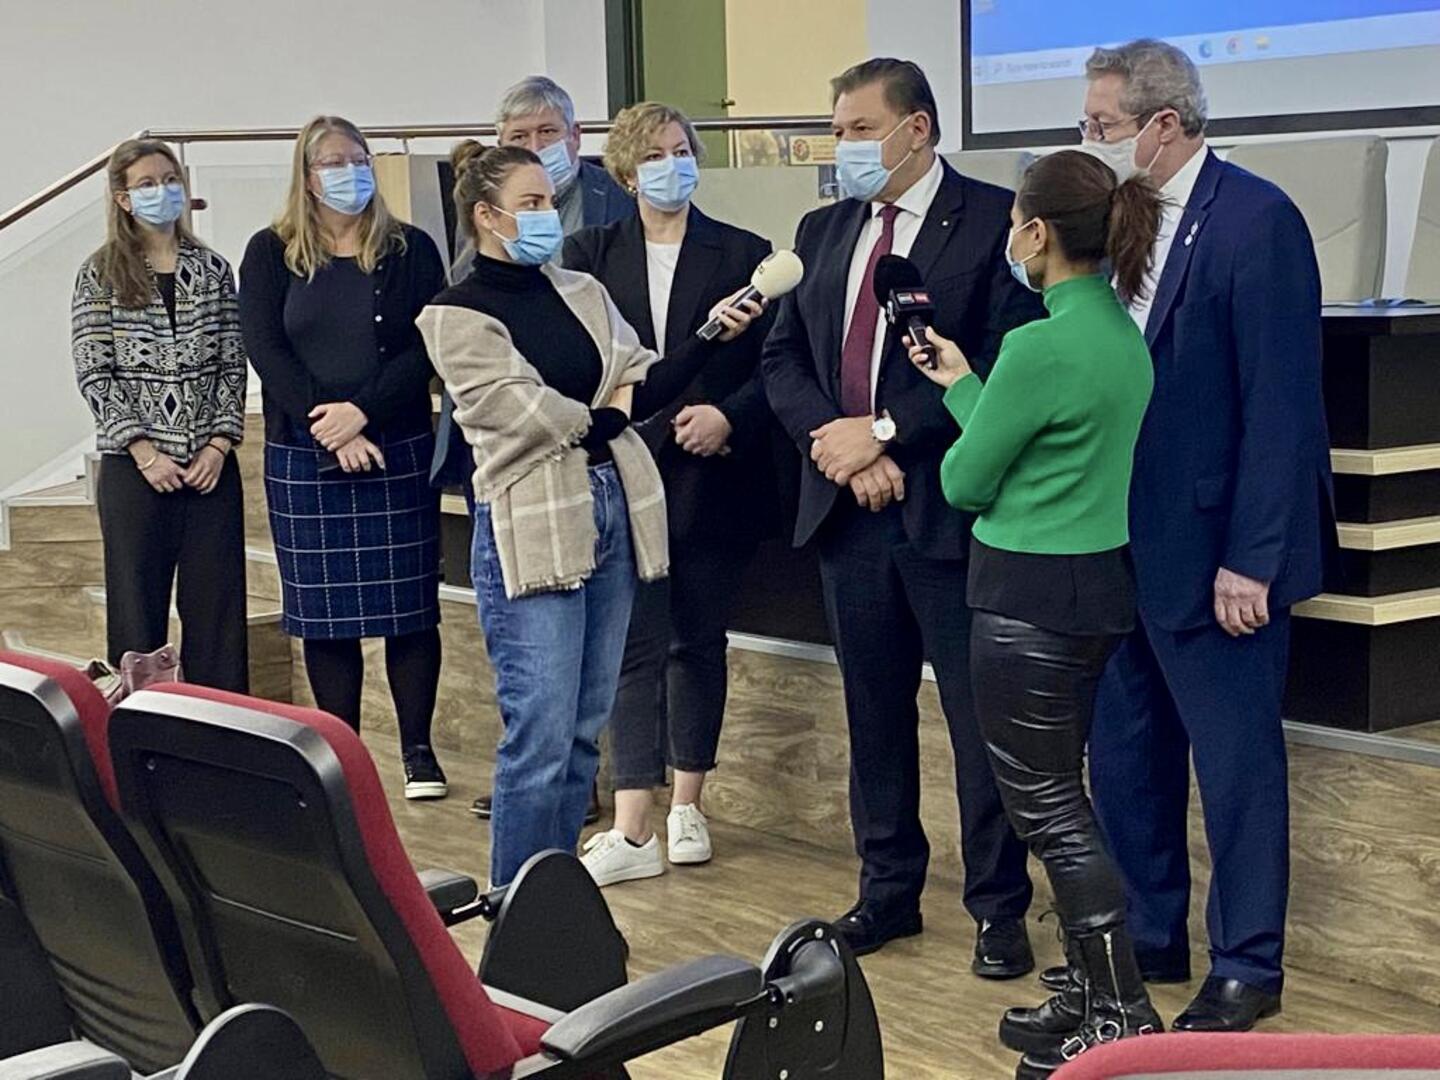 Minister of Health, Professor Alexandru Rafila, tells the press about the project's importance to Romania. The Norwegian delegation with Mari Molvik, Christine Årdal, Horst Bentele and Miriam Sare participate in the press conference. Photo: Vlad Popescu 